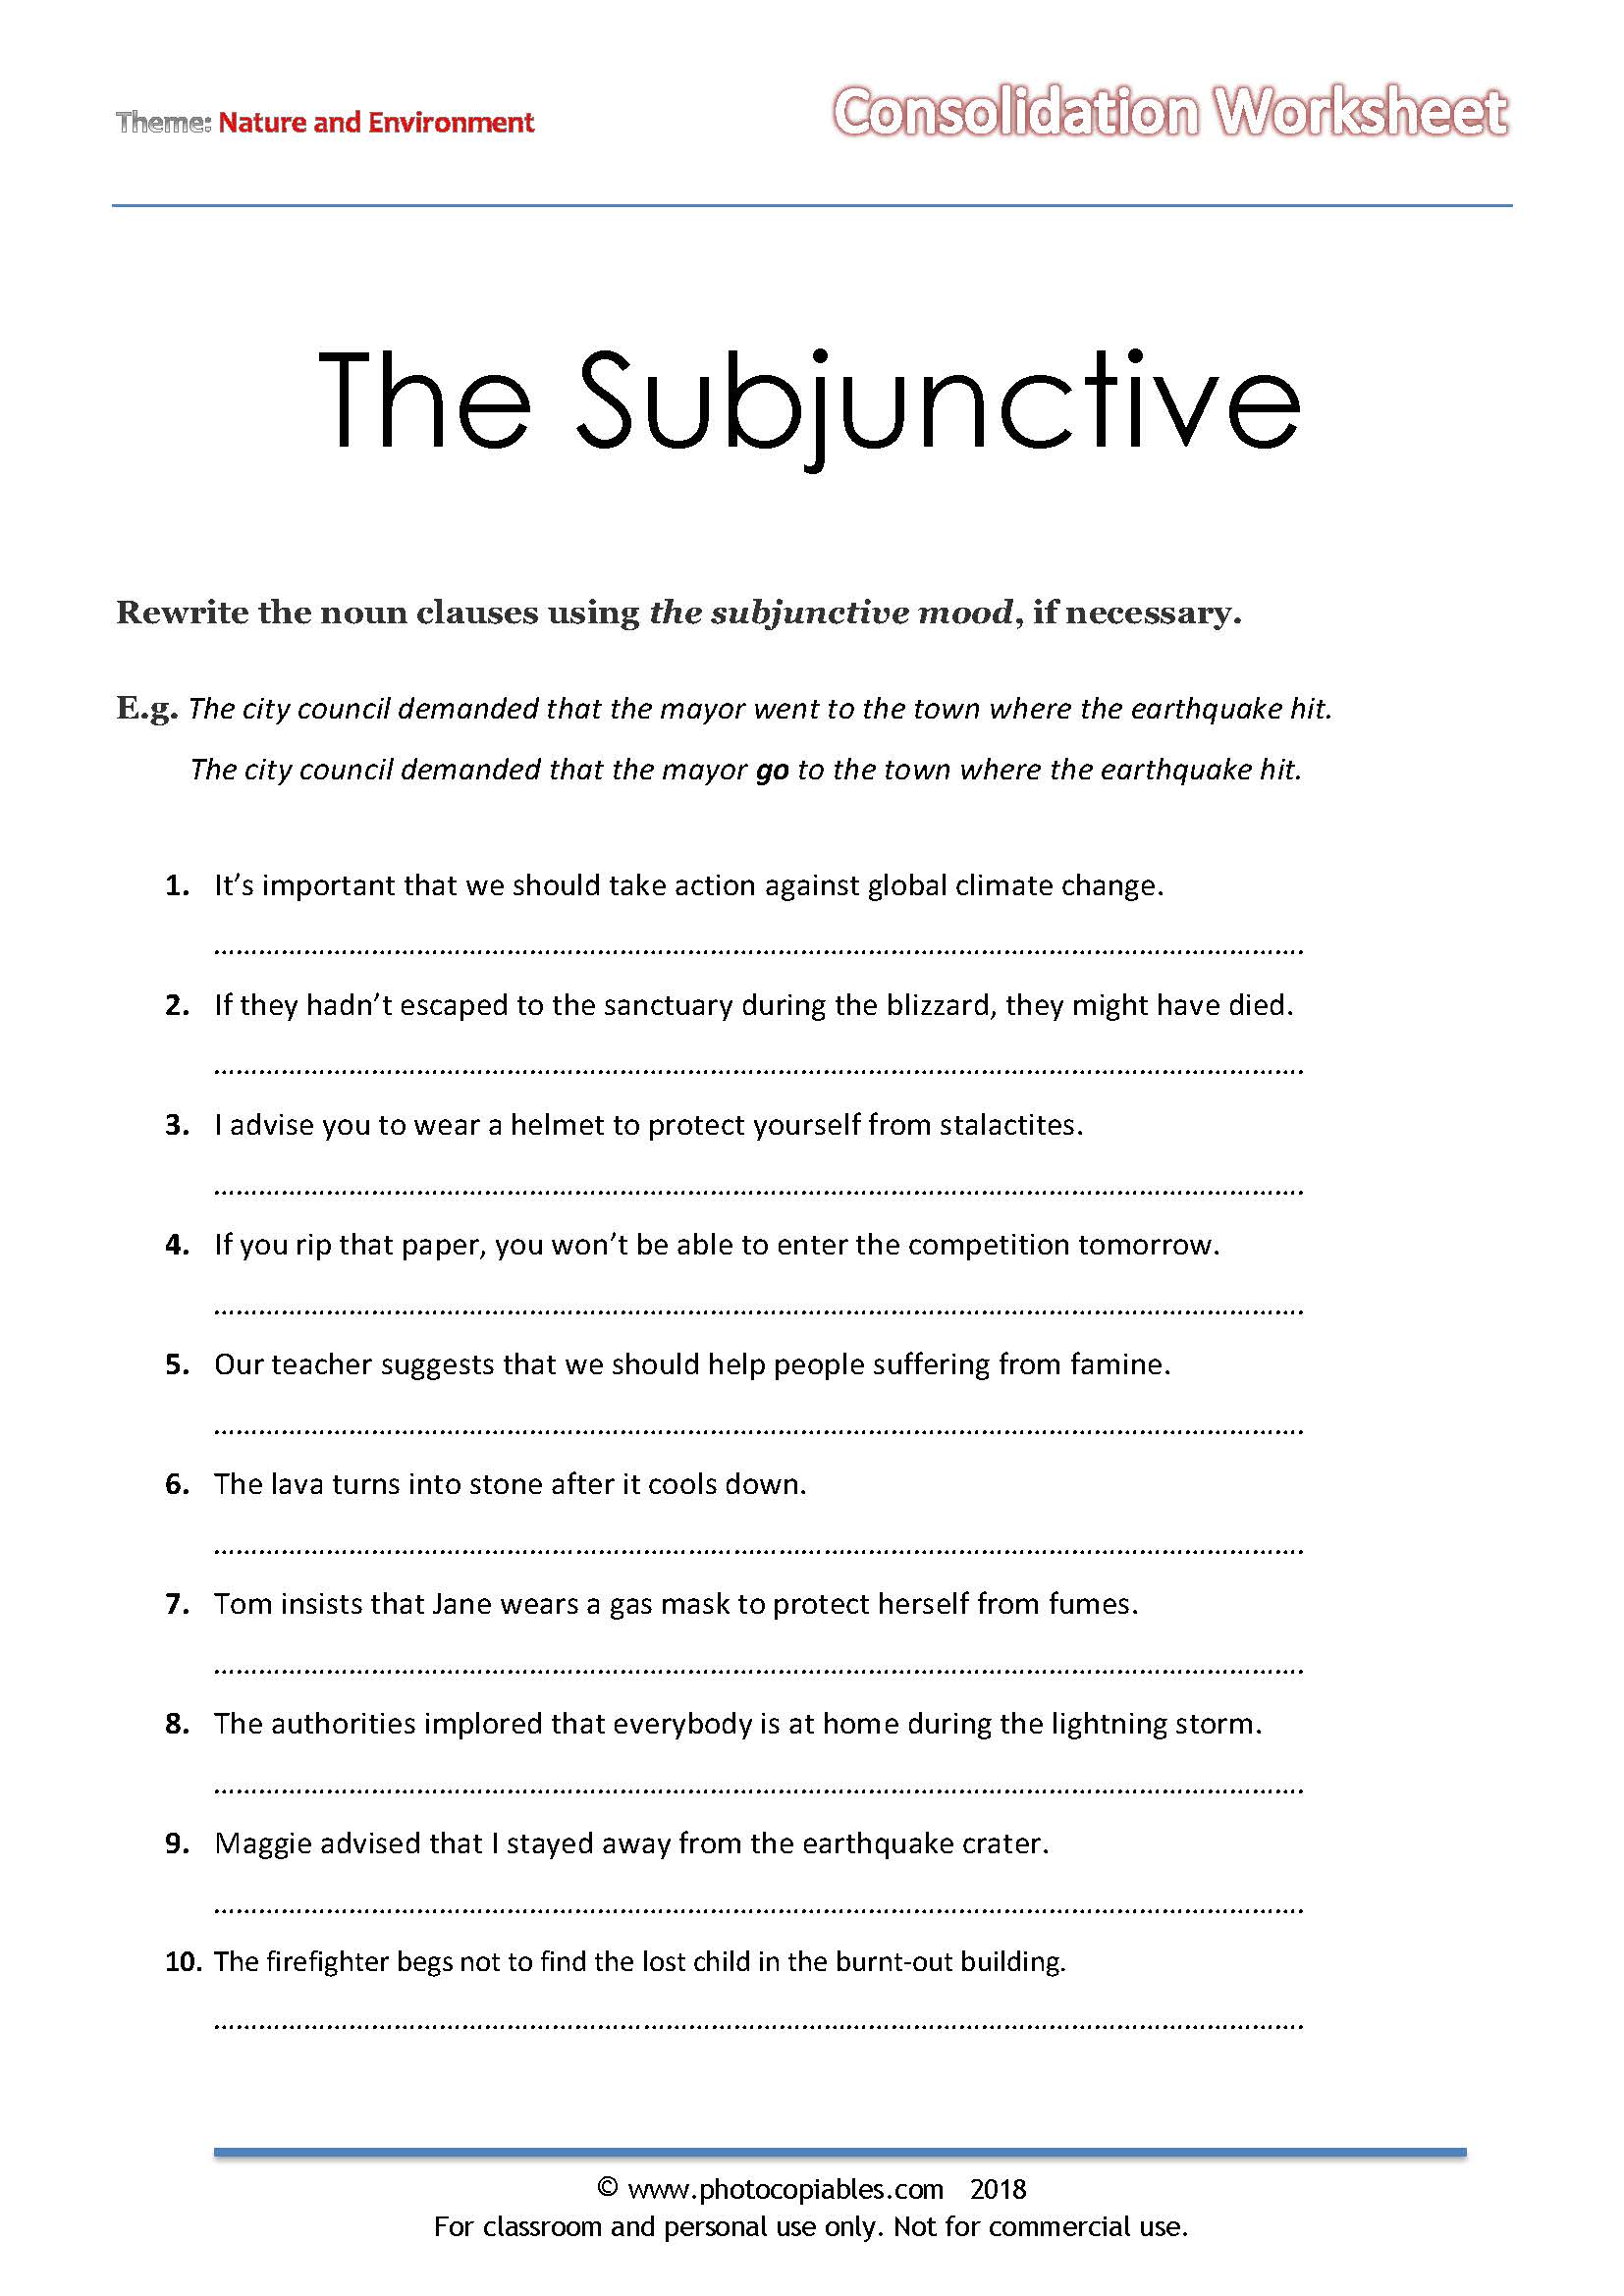 The Subjunctive Mood Worksheet Photocopiables